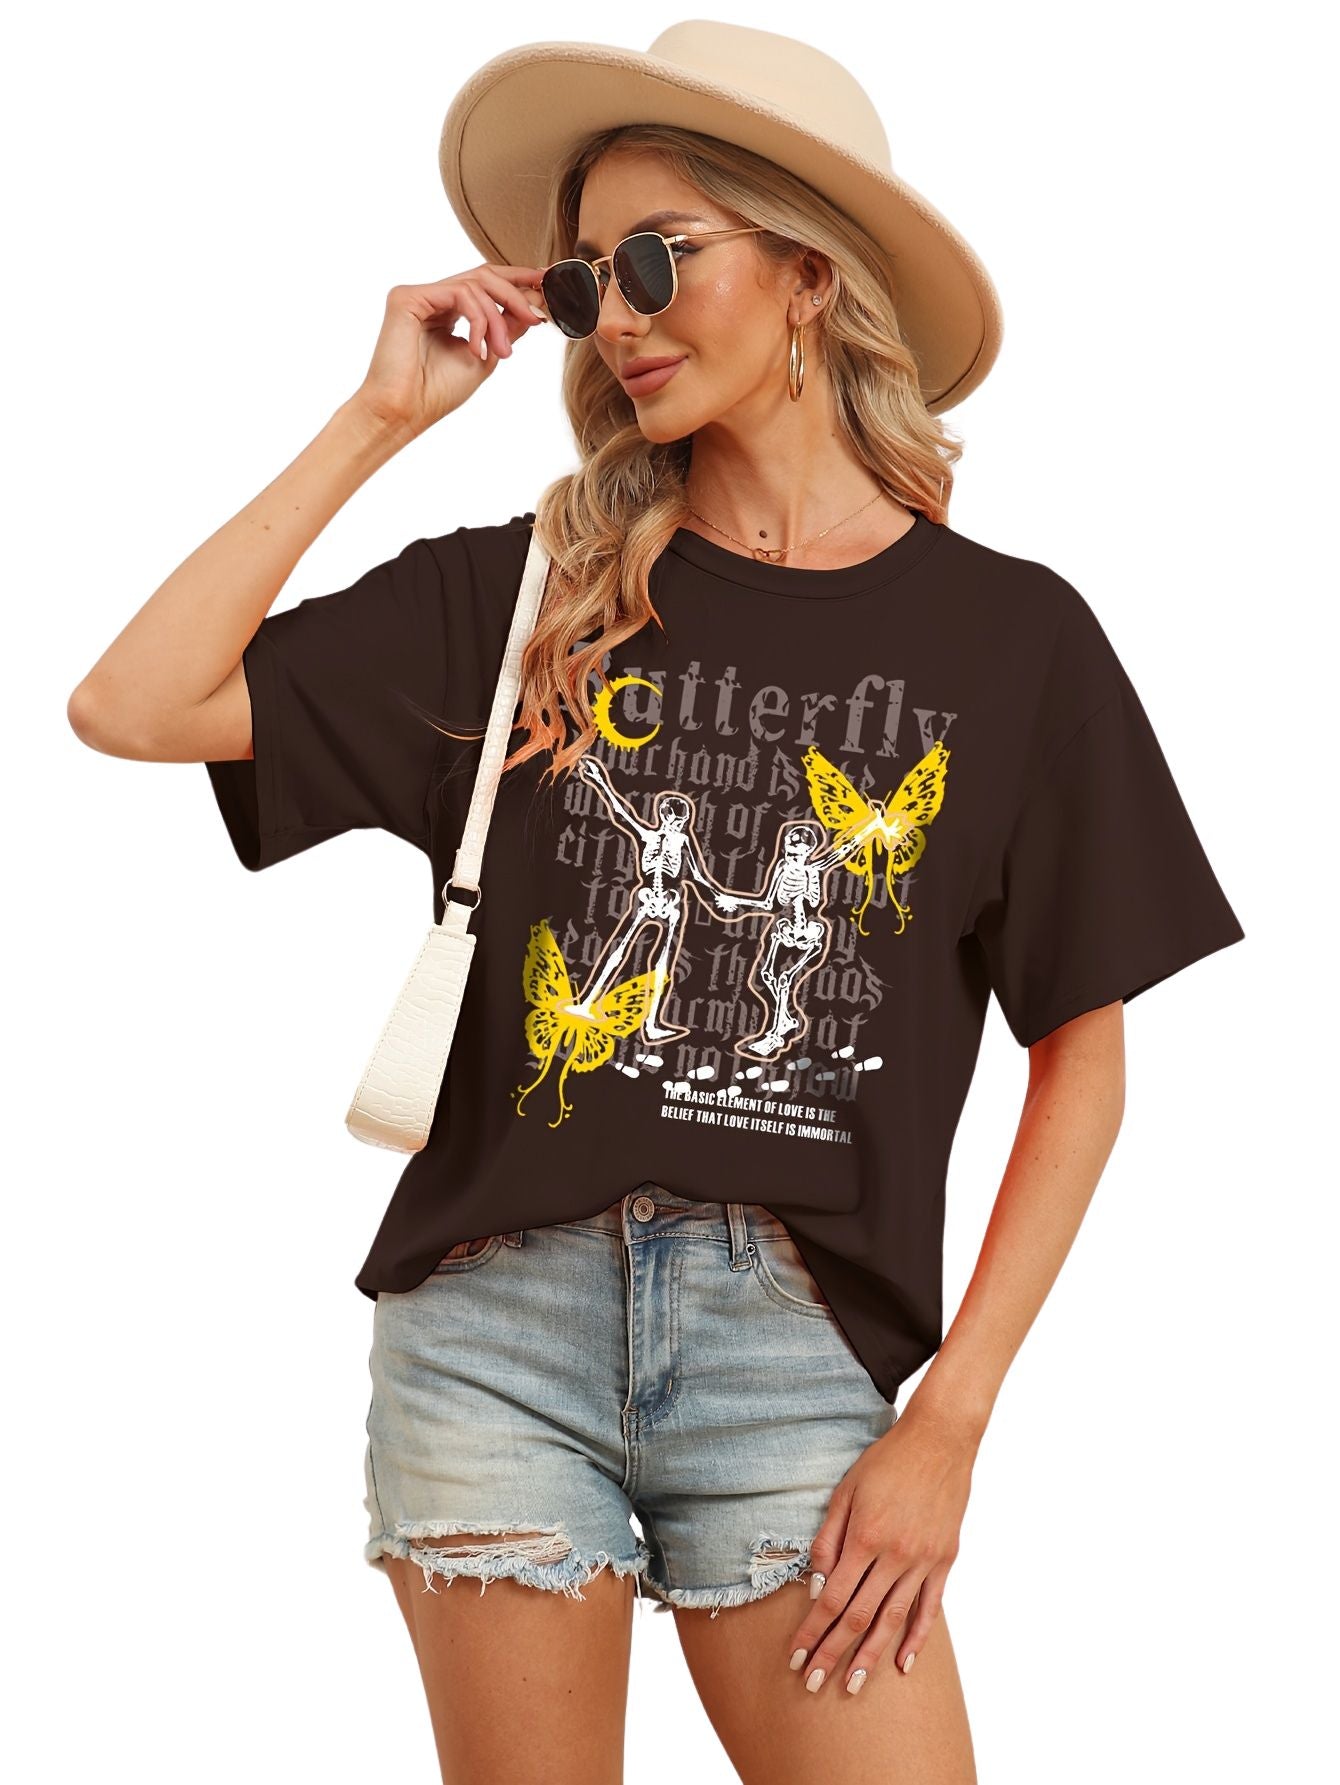 Skull & Butterfly Print T-shirt, Casual Crew Neck Short Sleeve Top For Spring & Summer, Women's Clothing